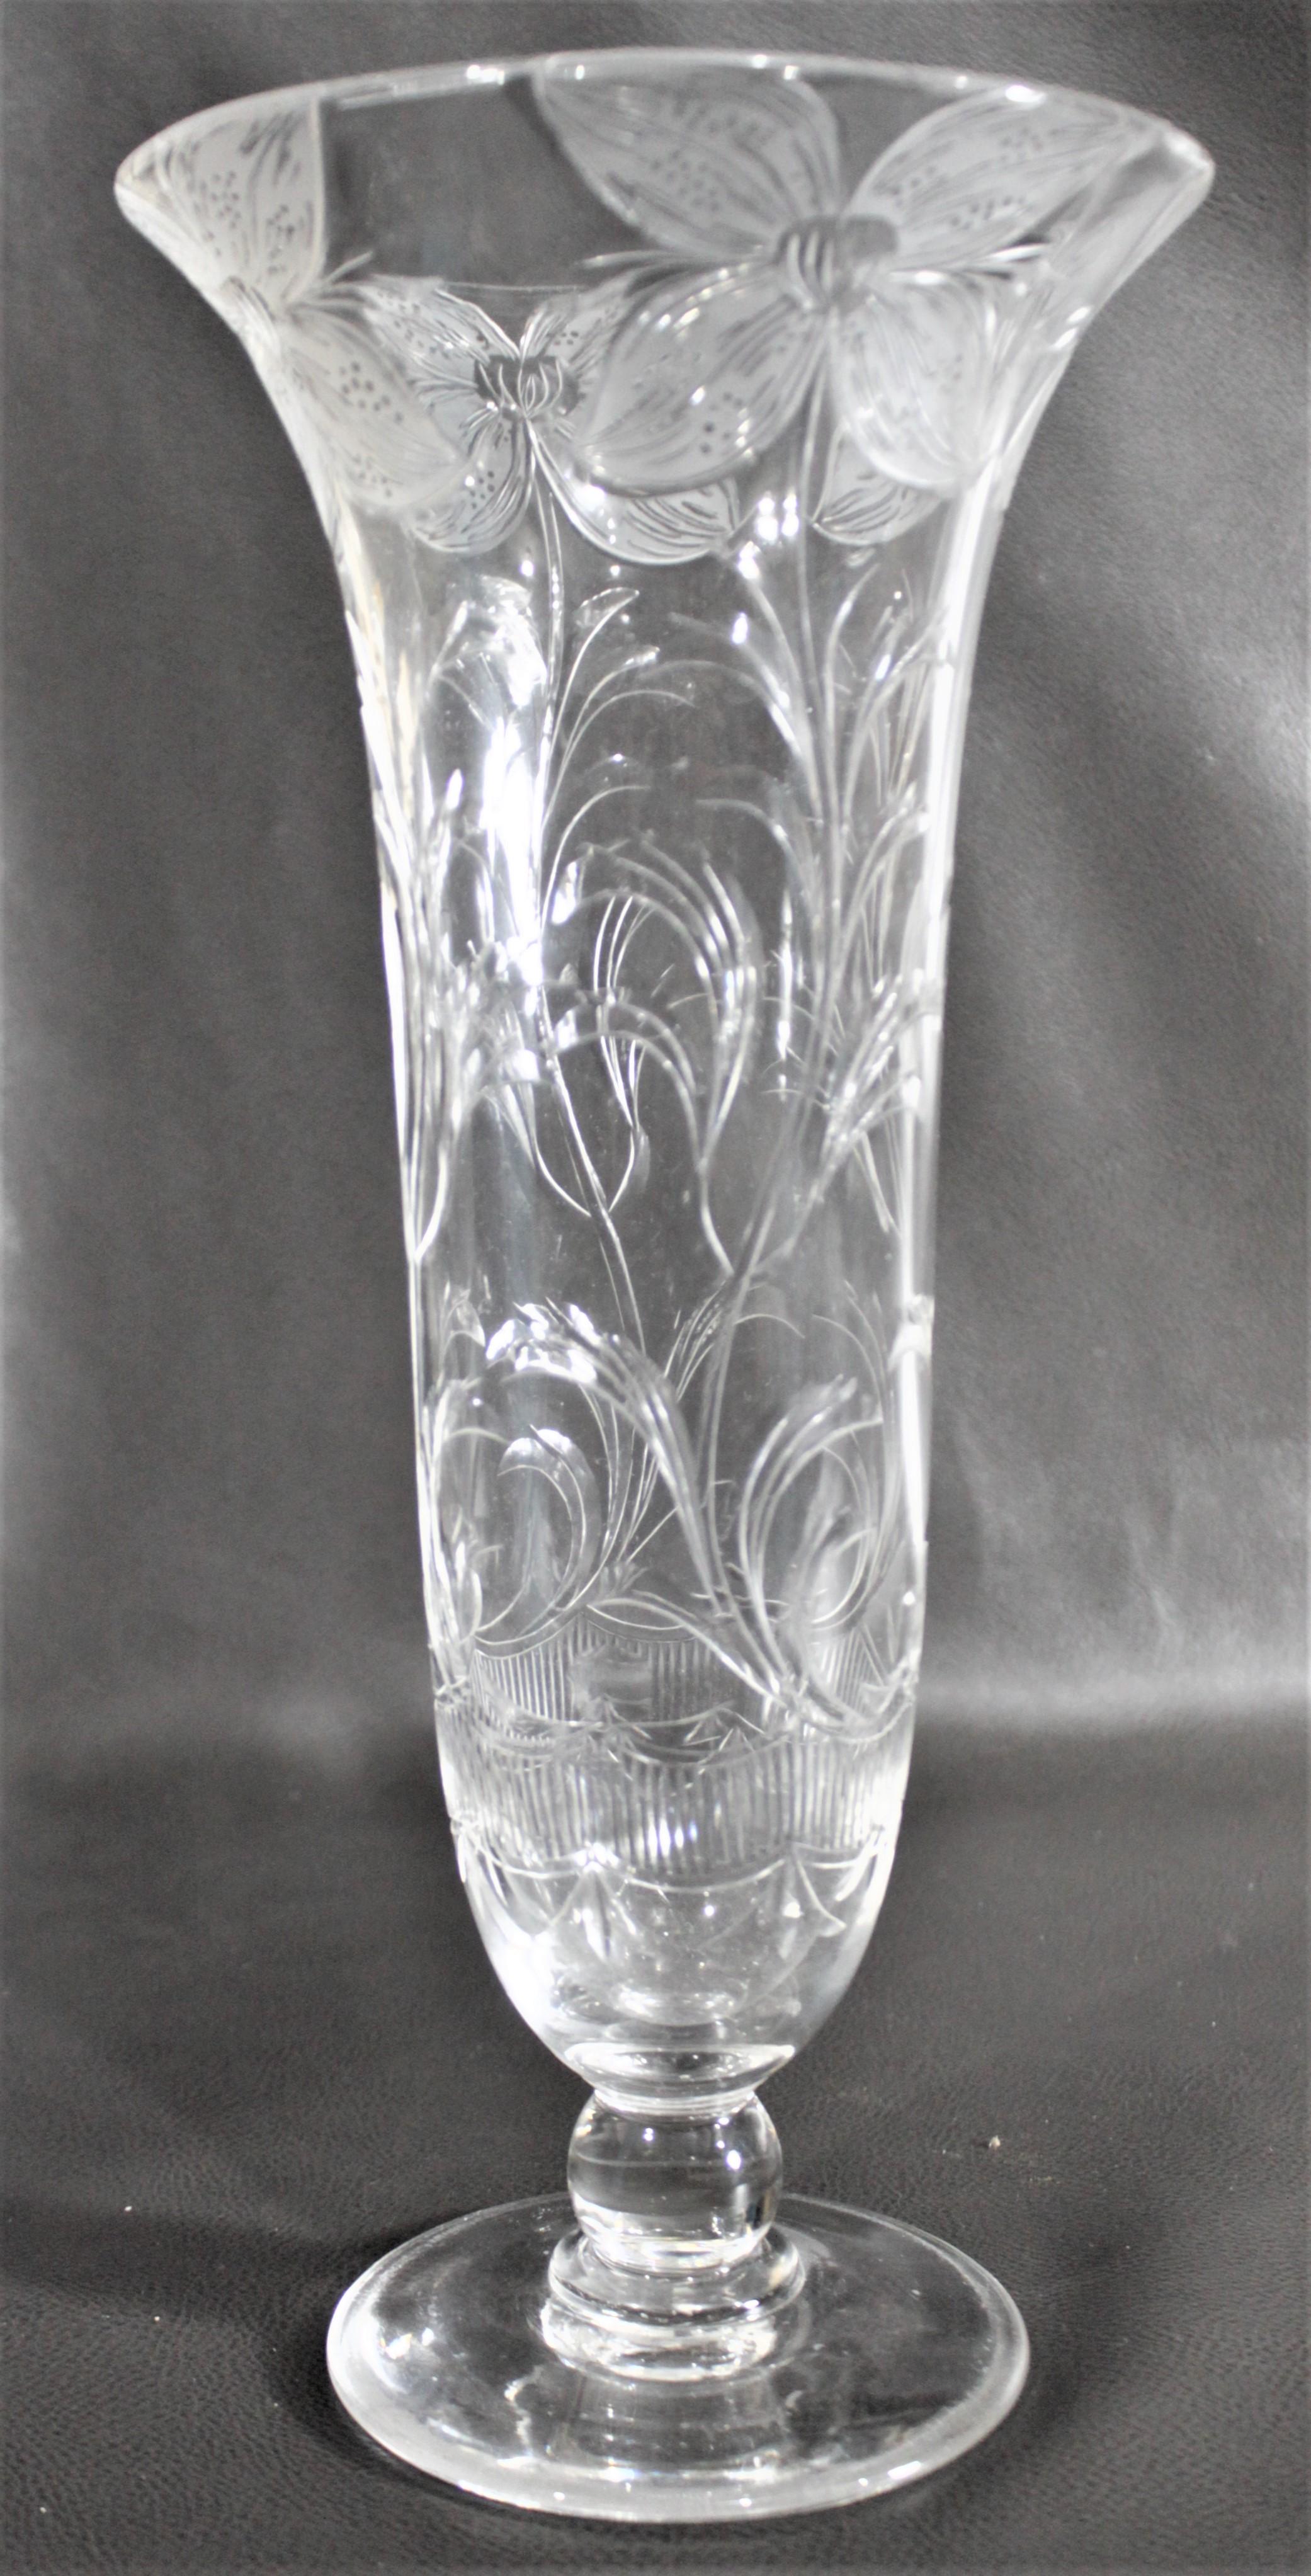 Antique Art Nouveau Clear Cut Crystal Vase with Floral Decoration In Good Condition For Sale In Hamilton, Ontario